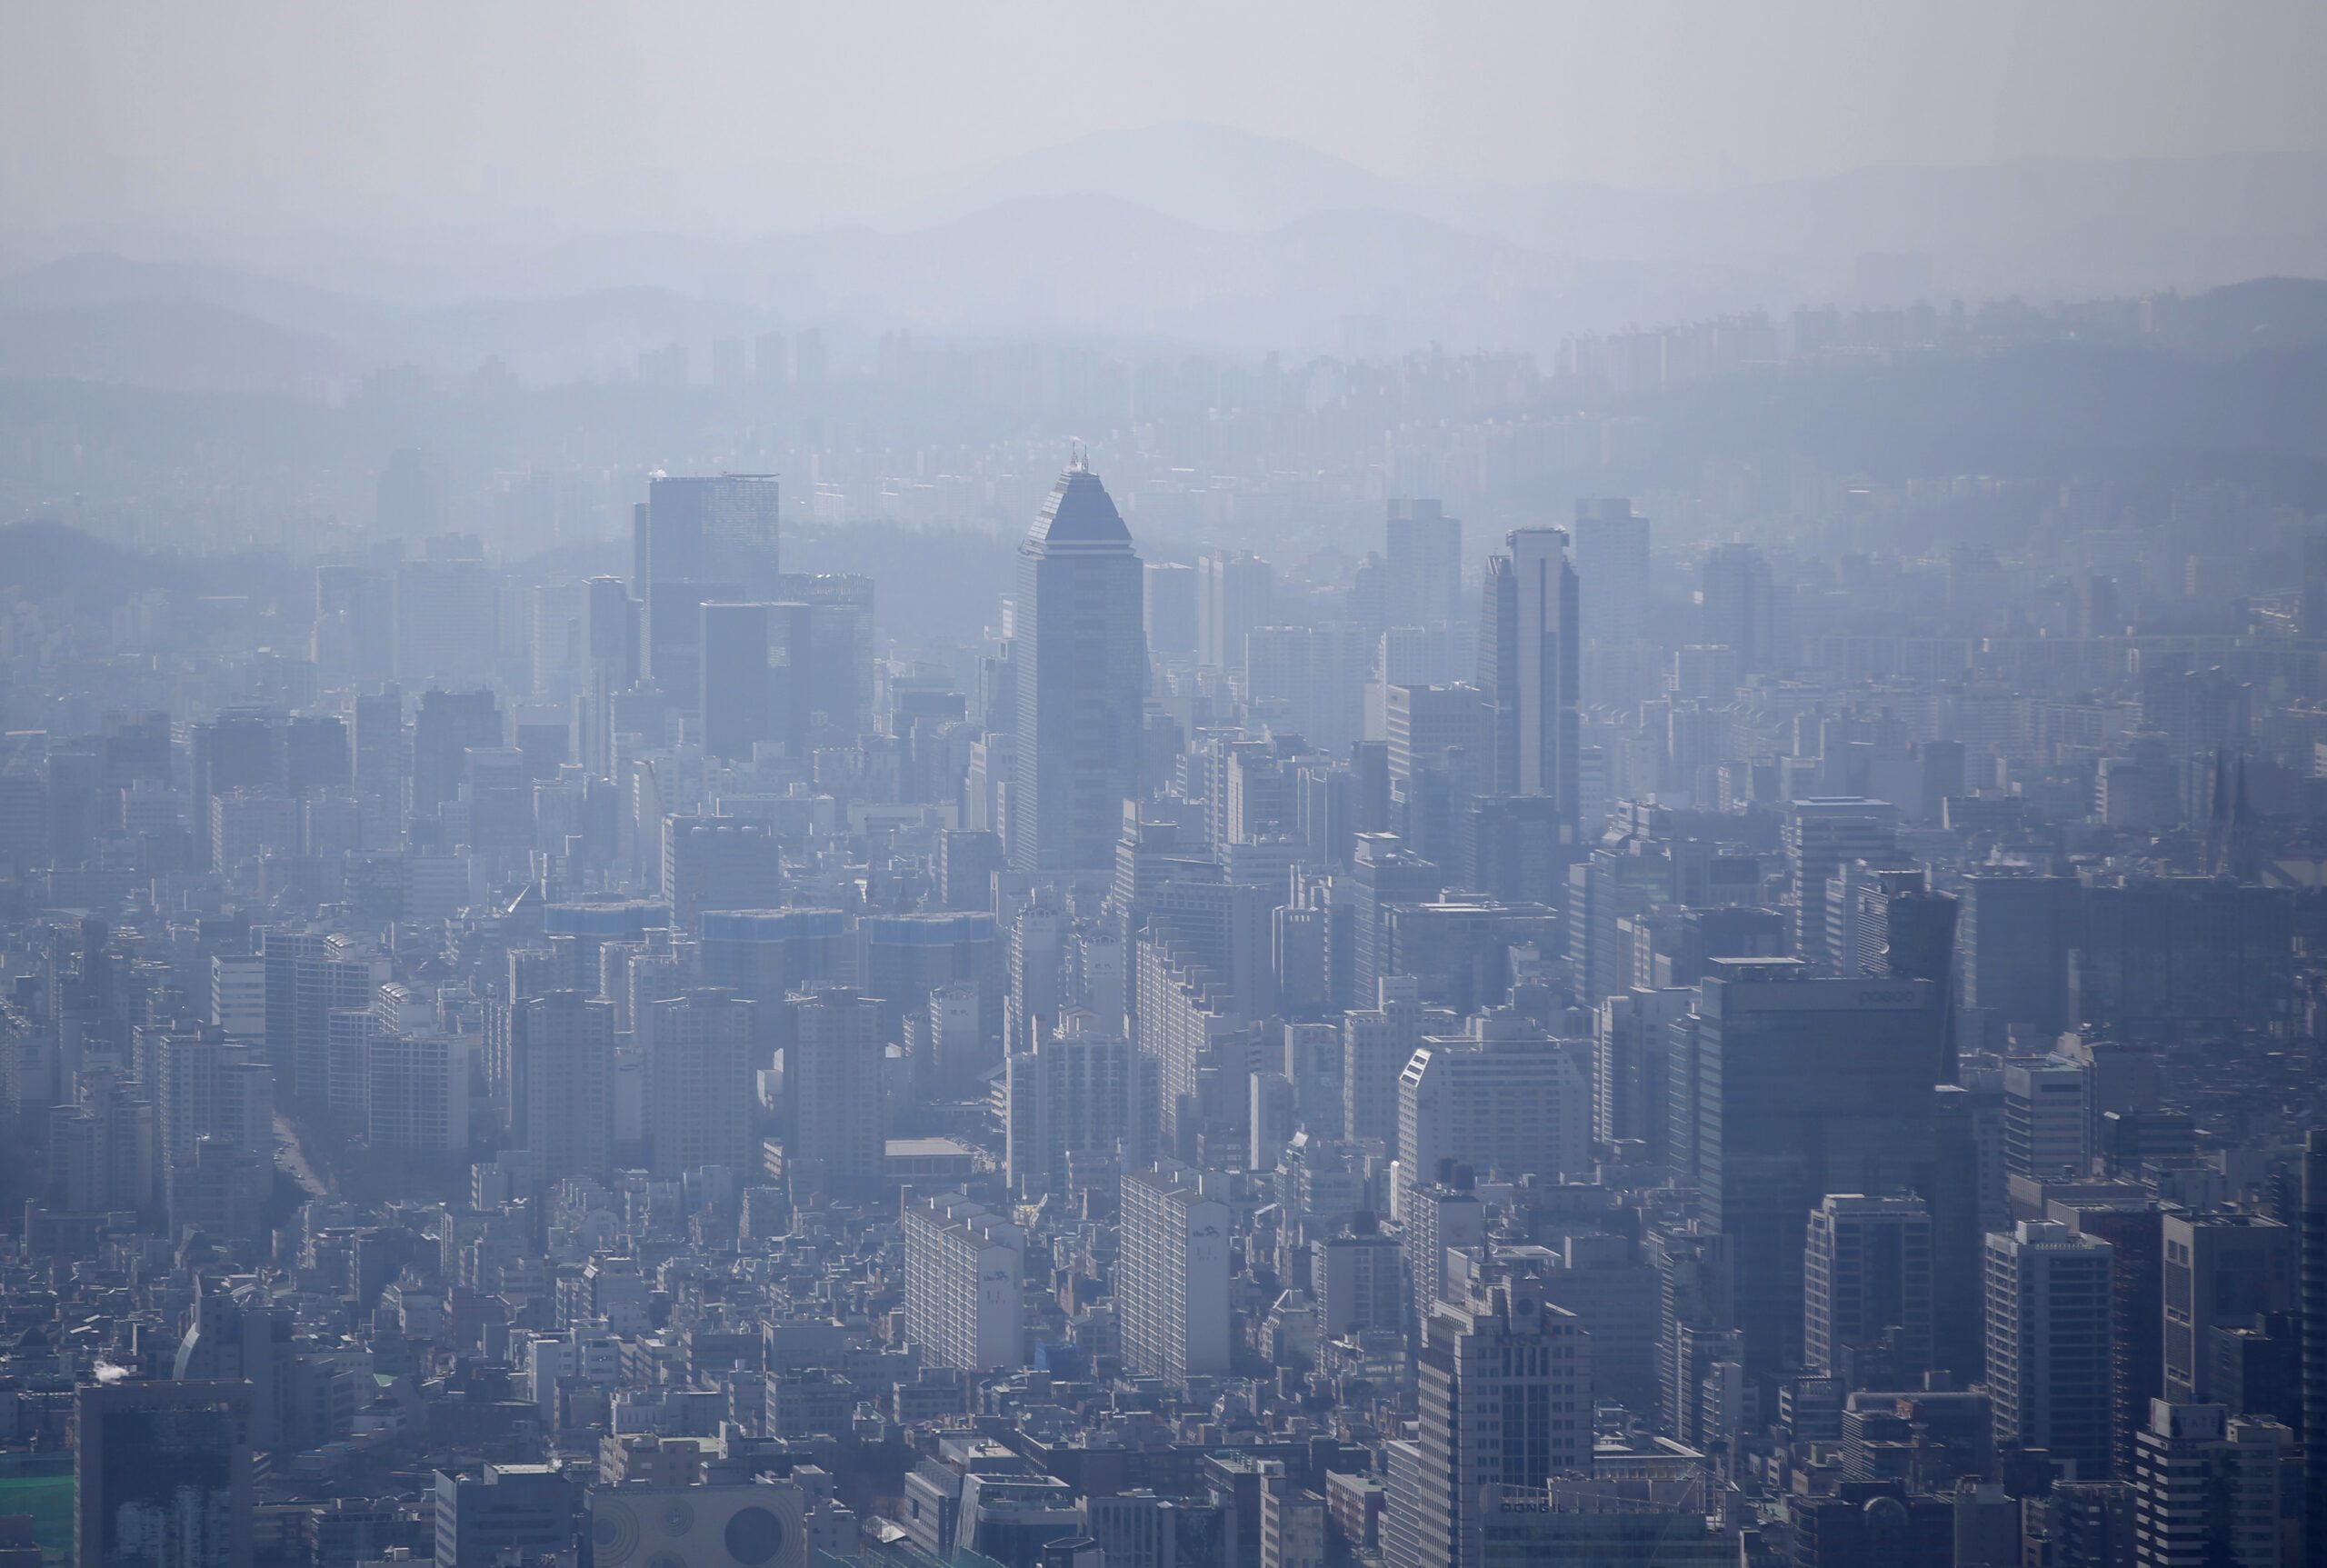 The skyline of central Seoul is seen during a foggy day in Seoul March 4, 2015. South Korea's central bank cut interest rates for the first time in five months on Thursday in a surprise move, joining the ranks of other economies which have recently taken advantage of lower inflation to ease monetary policy to spur sluggish growth. Picture taken on March 4, 2015.  REUTERS/Kim Hong-Ji (SOUTH KOREA - Tags: ENVIRONMENT CITYSCAPE BUSINESS)